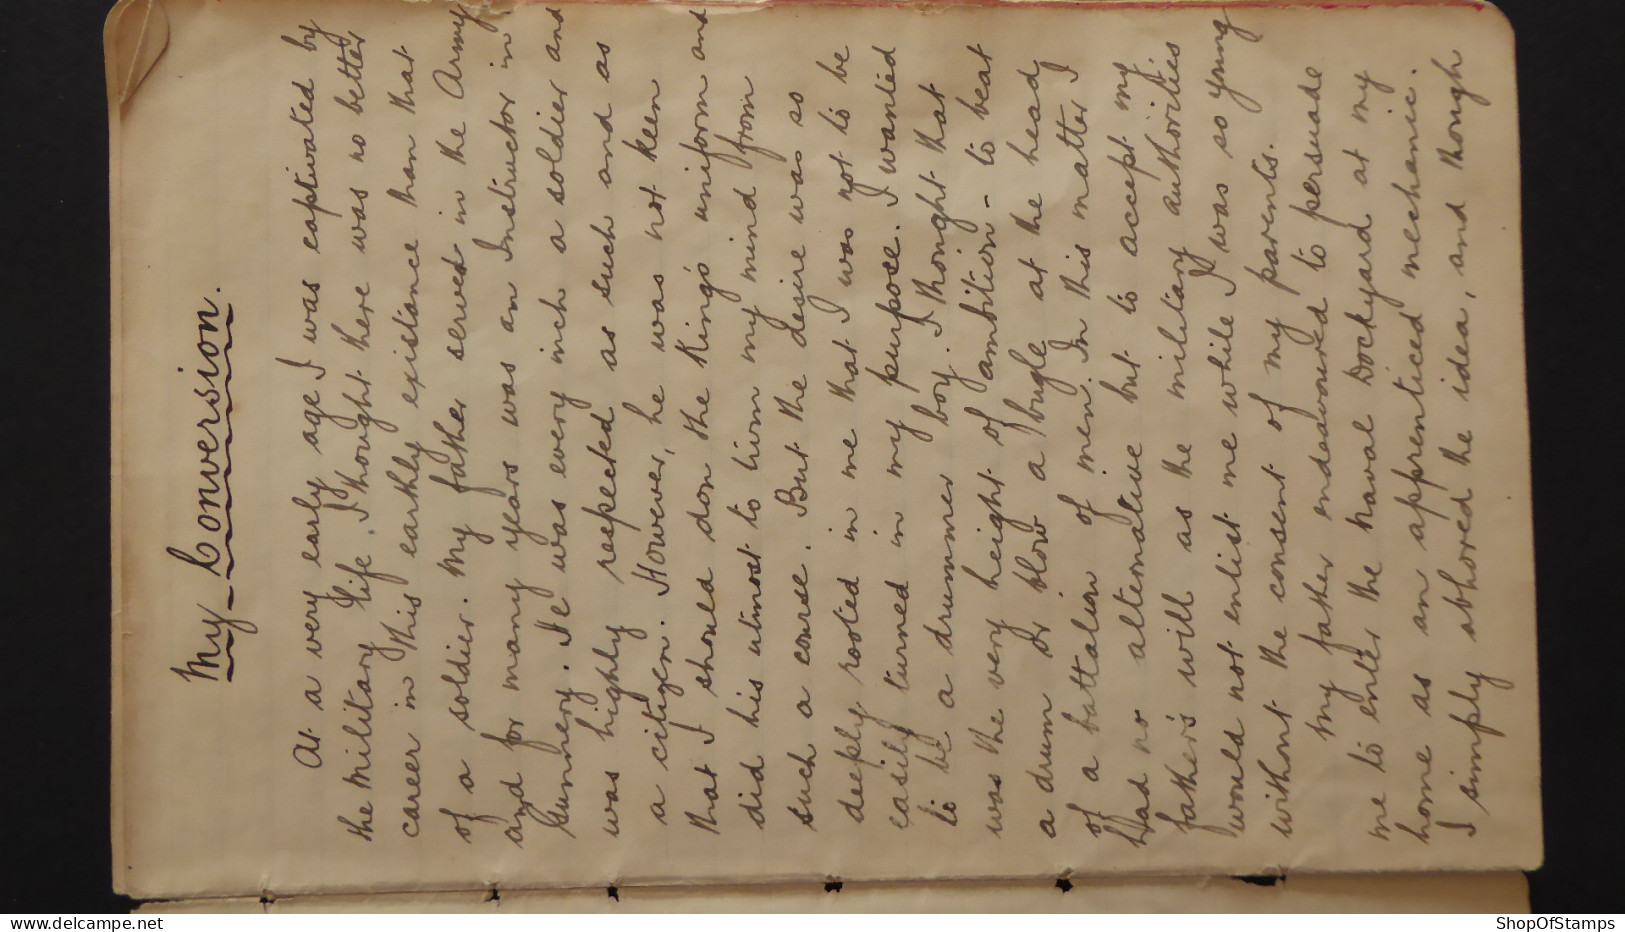 MISSIONARY DIARY HAND WRITTEN BY Wm MANN, TIBETAN MISSIONARY PERIOD 1919 - Historical Documents